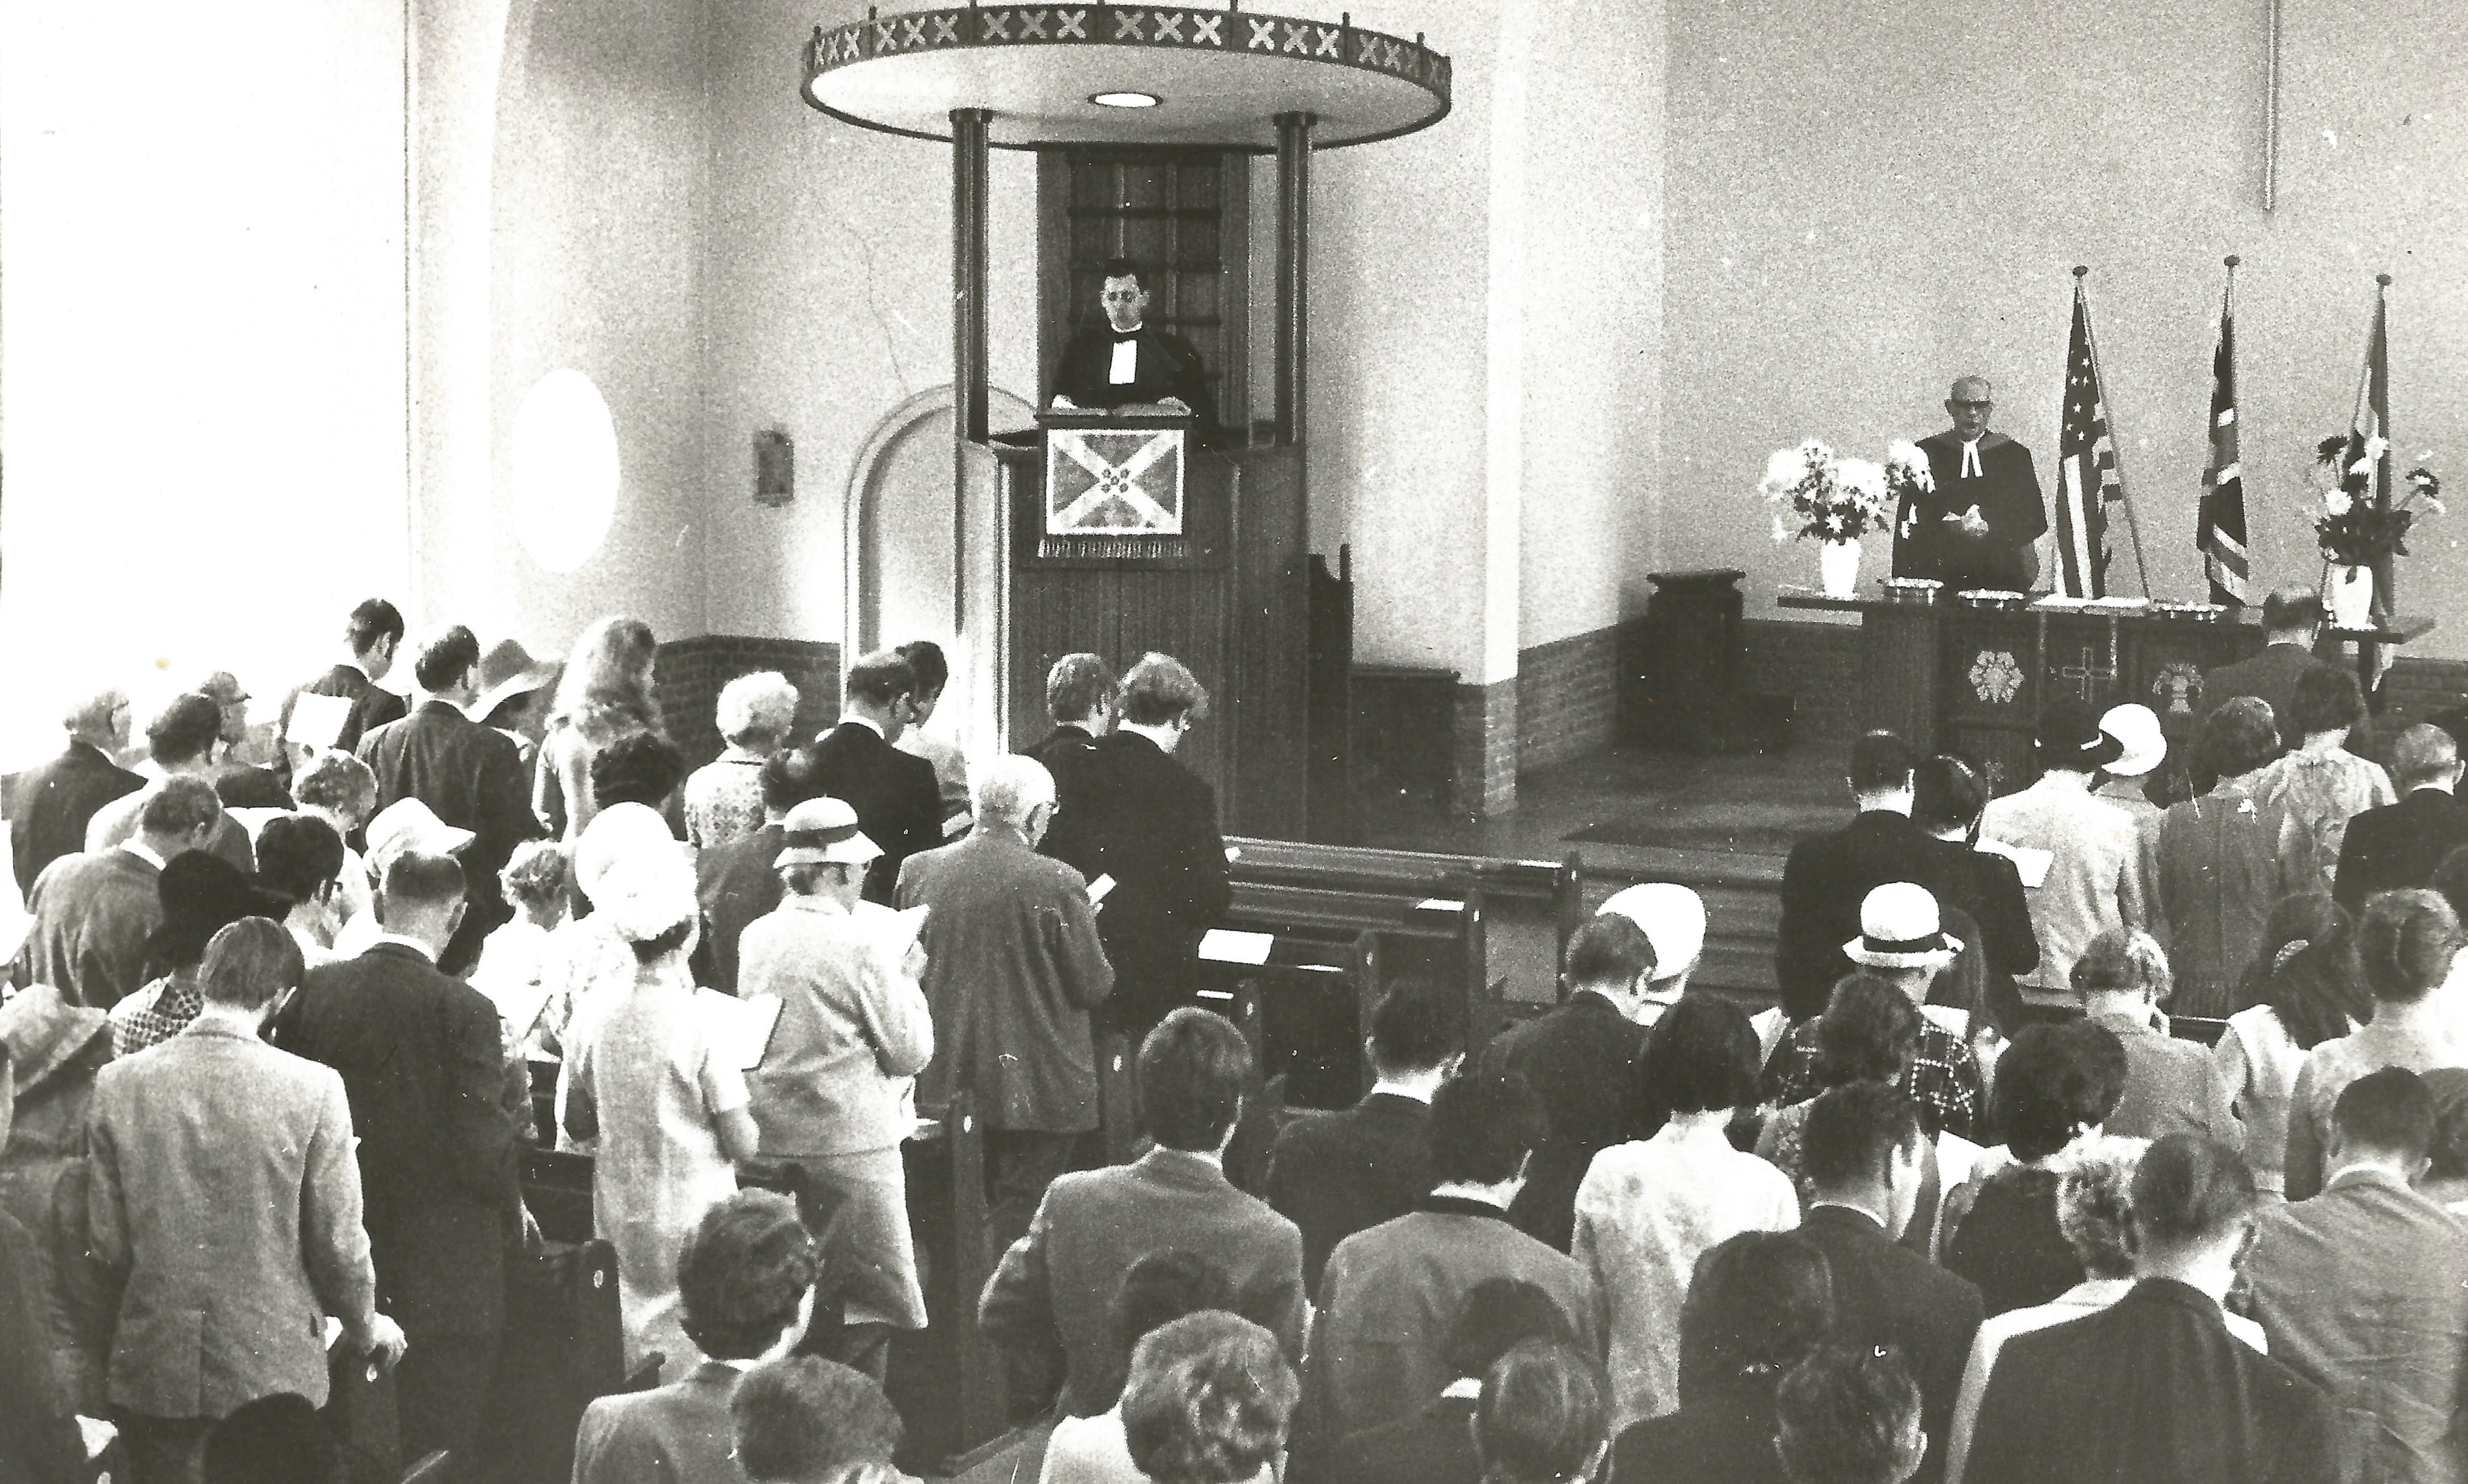 A service at the Rotterdam Kirk in 1970